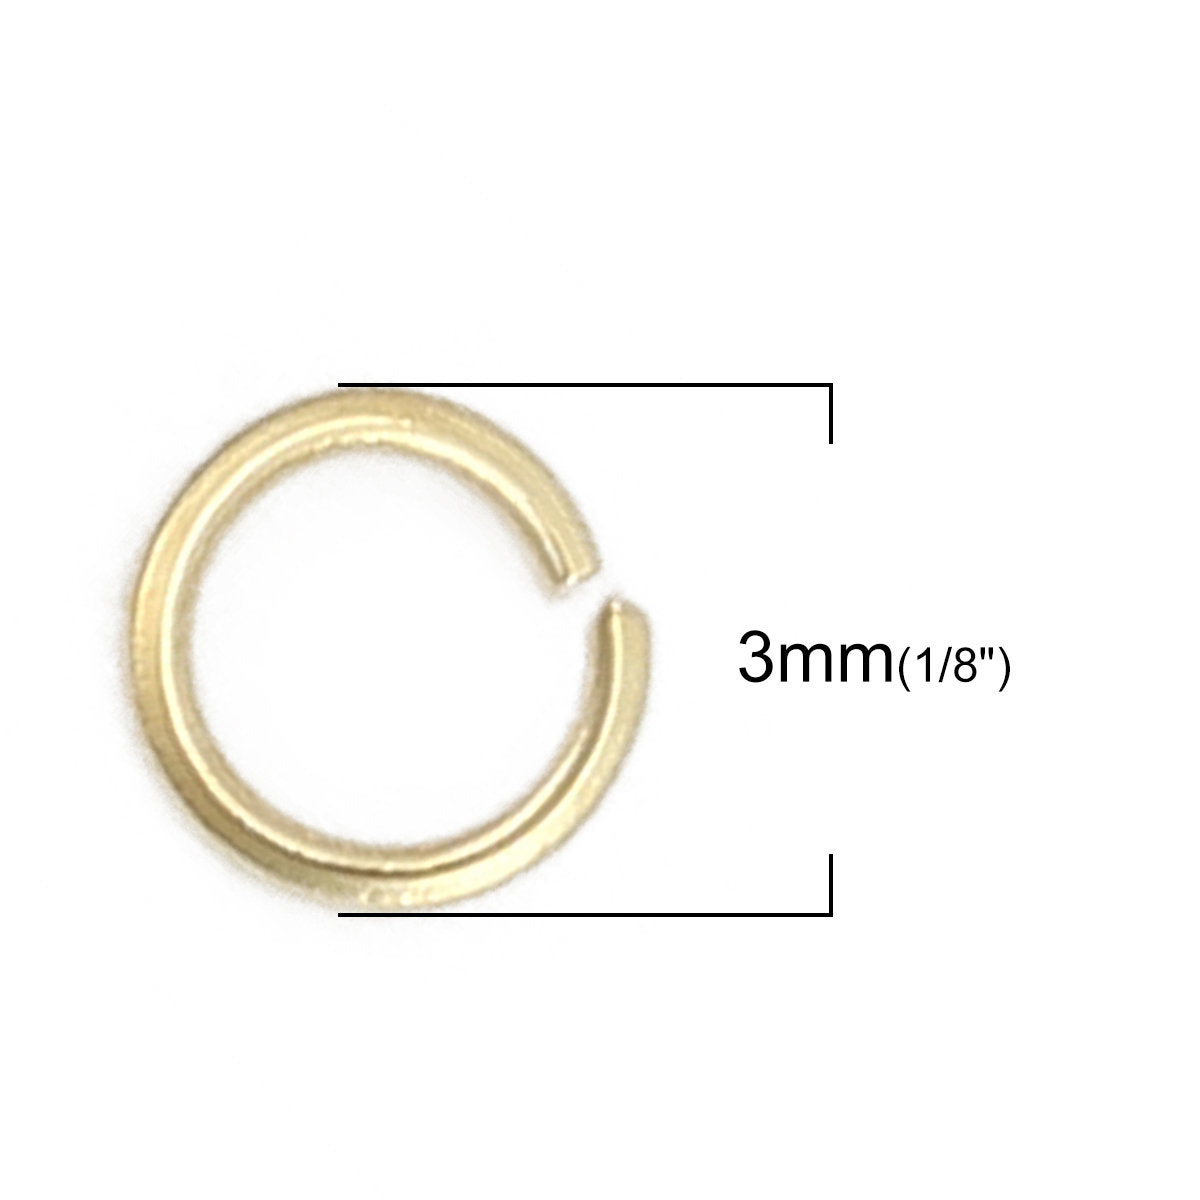 Brass Jump Ring Opener/Closer. With 4 slots for different wire thickness